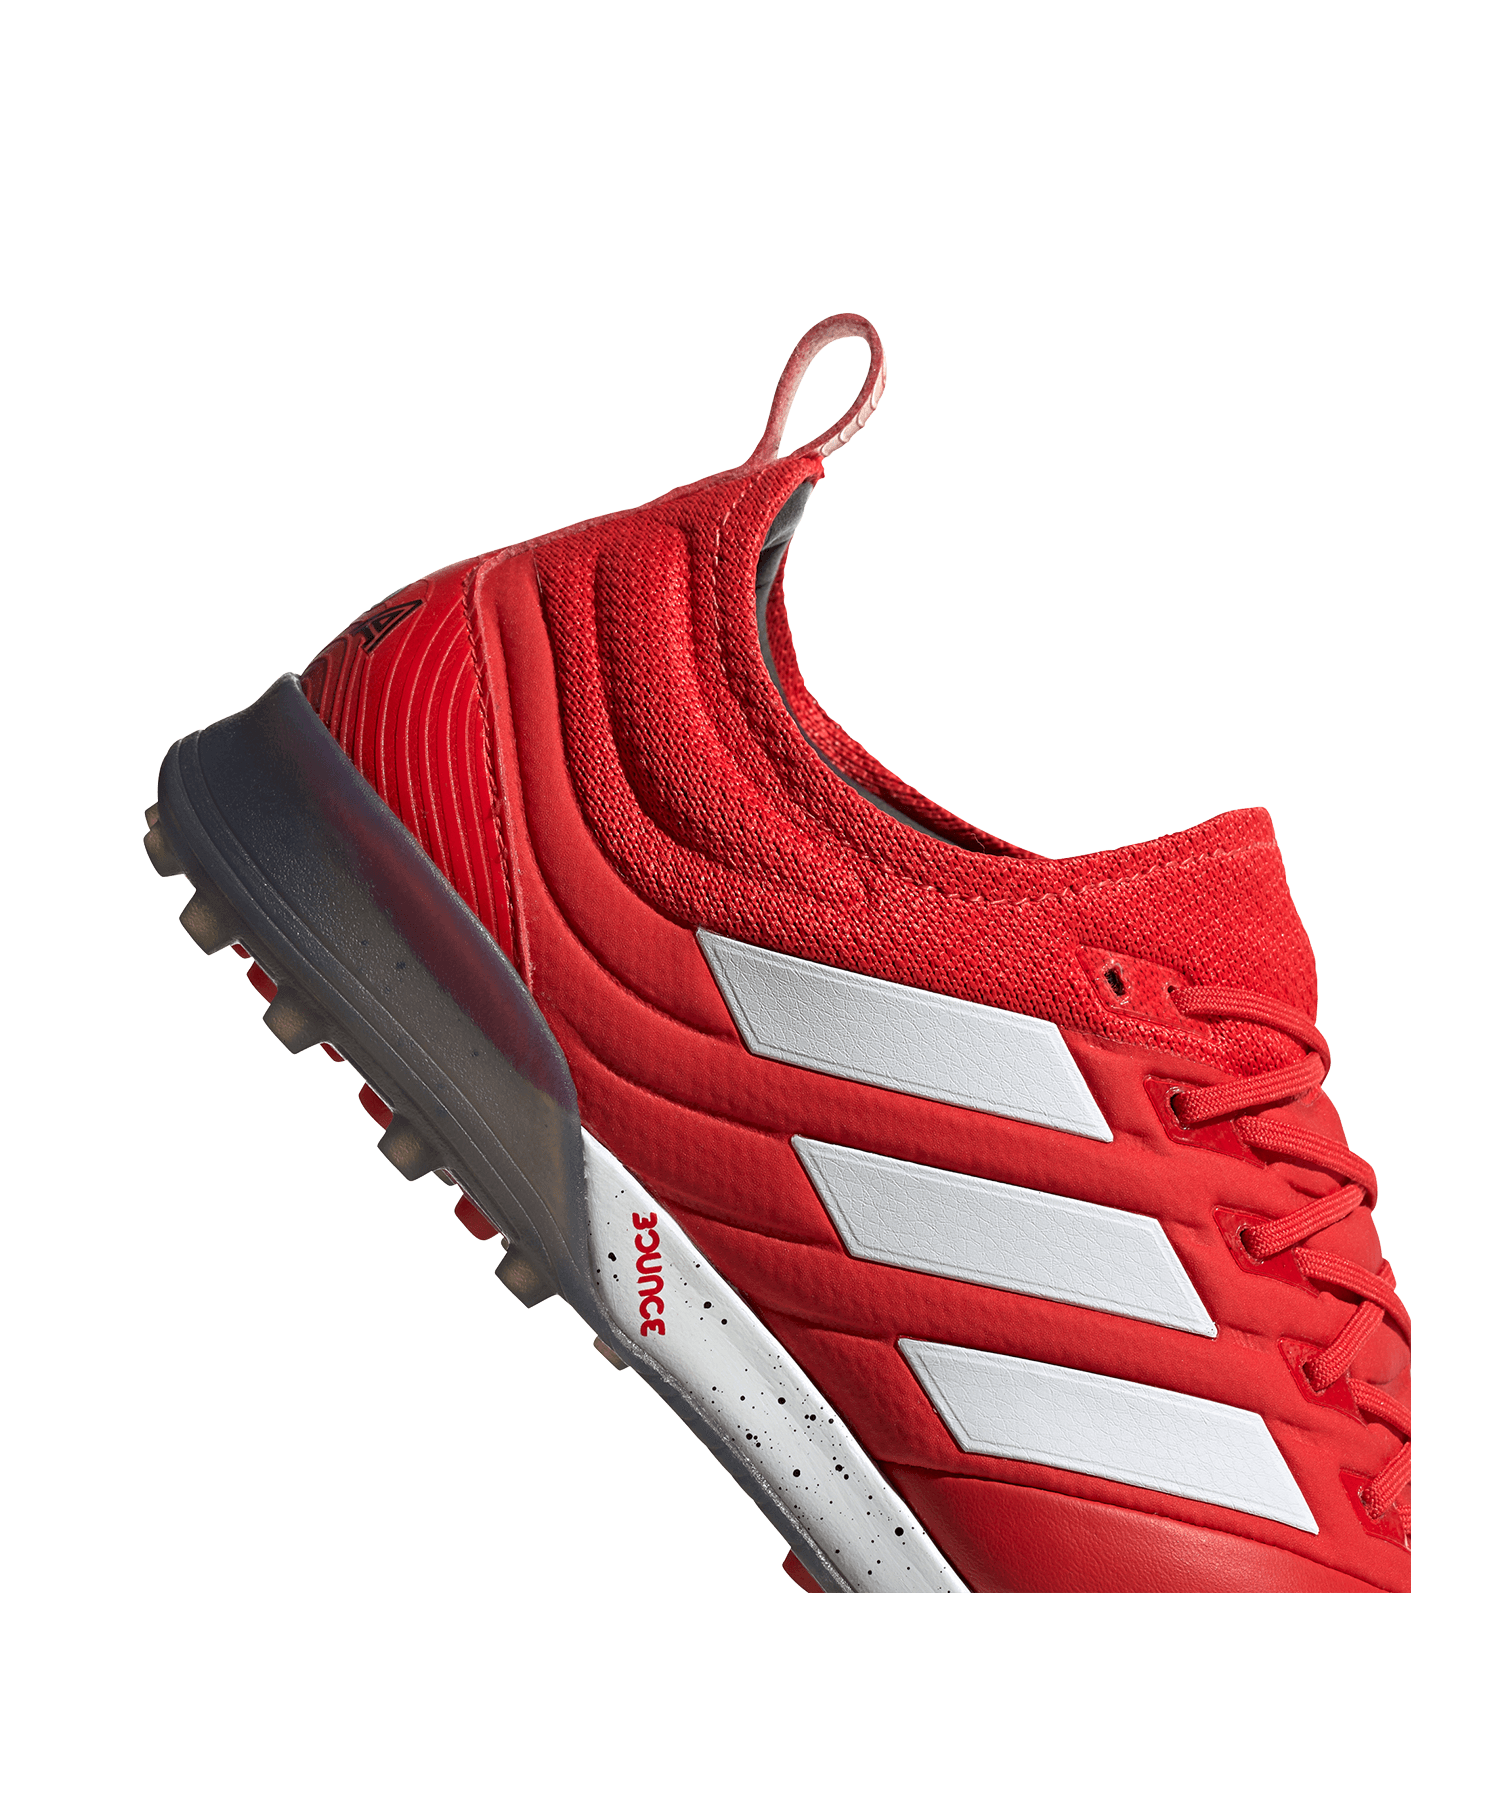 Surrounded double fuse adidas COPA Mutator 20.1 TF - Red